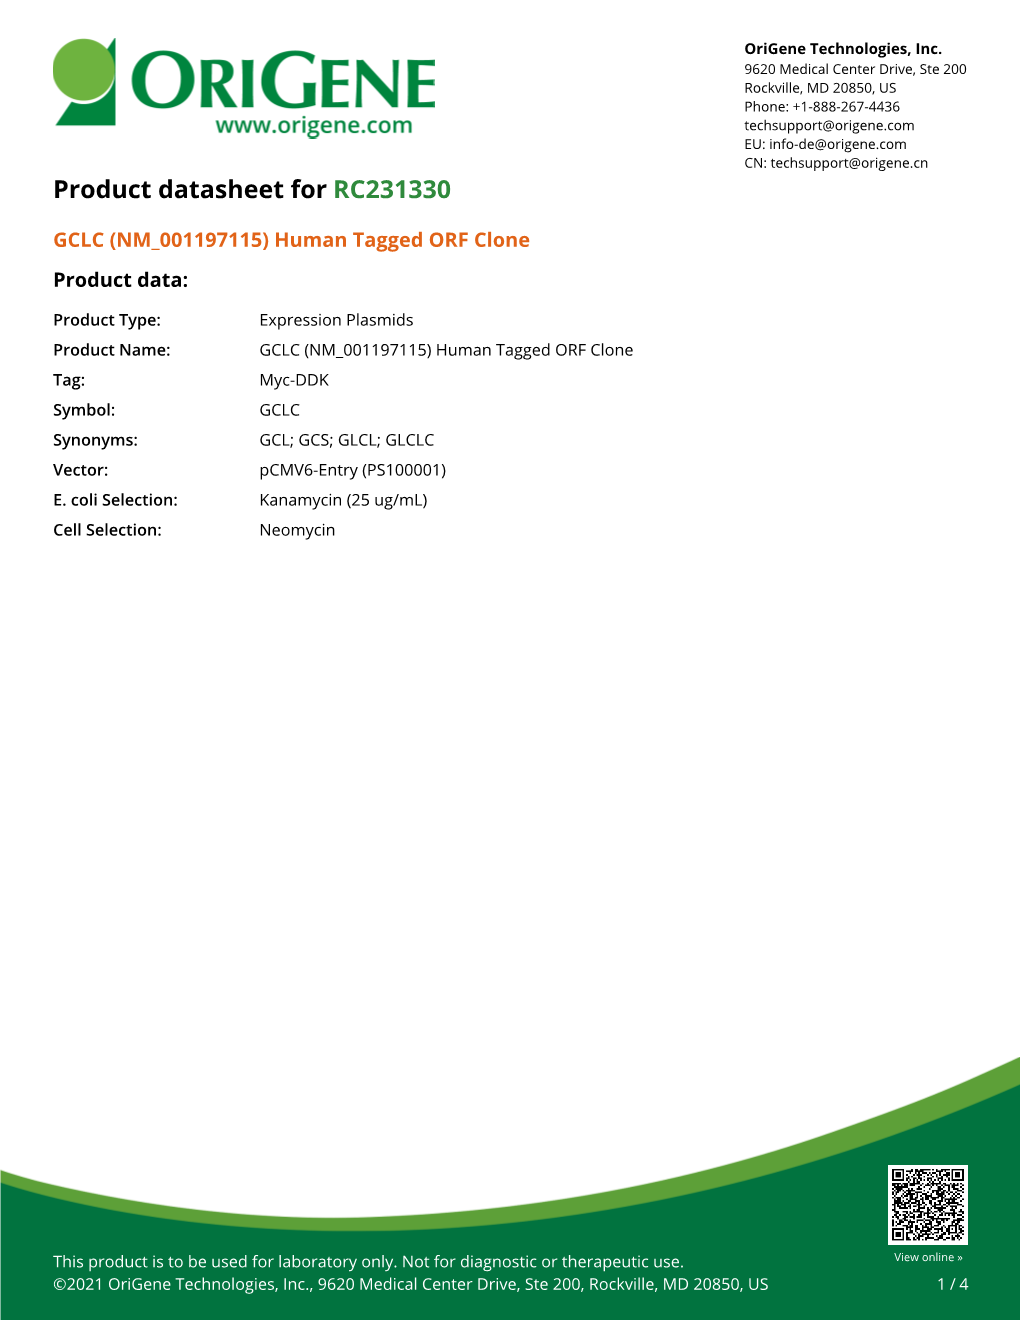 GCLC (NM 001197115) Human Tagged ORF Clone Product Data